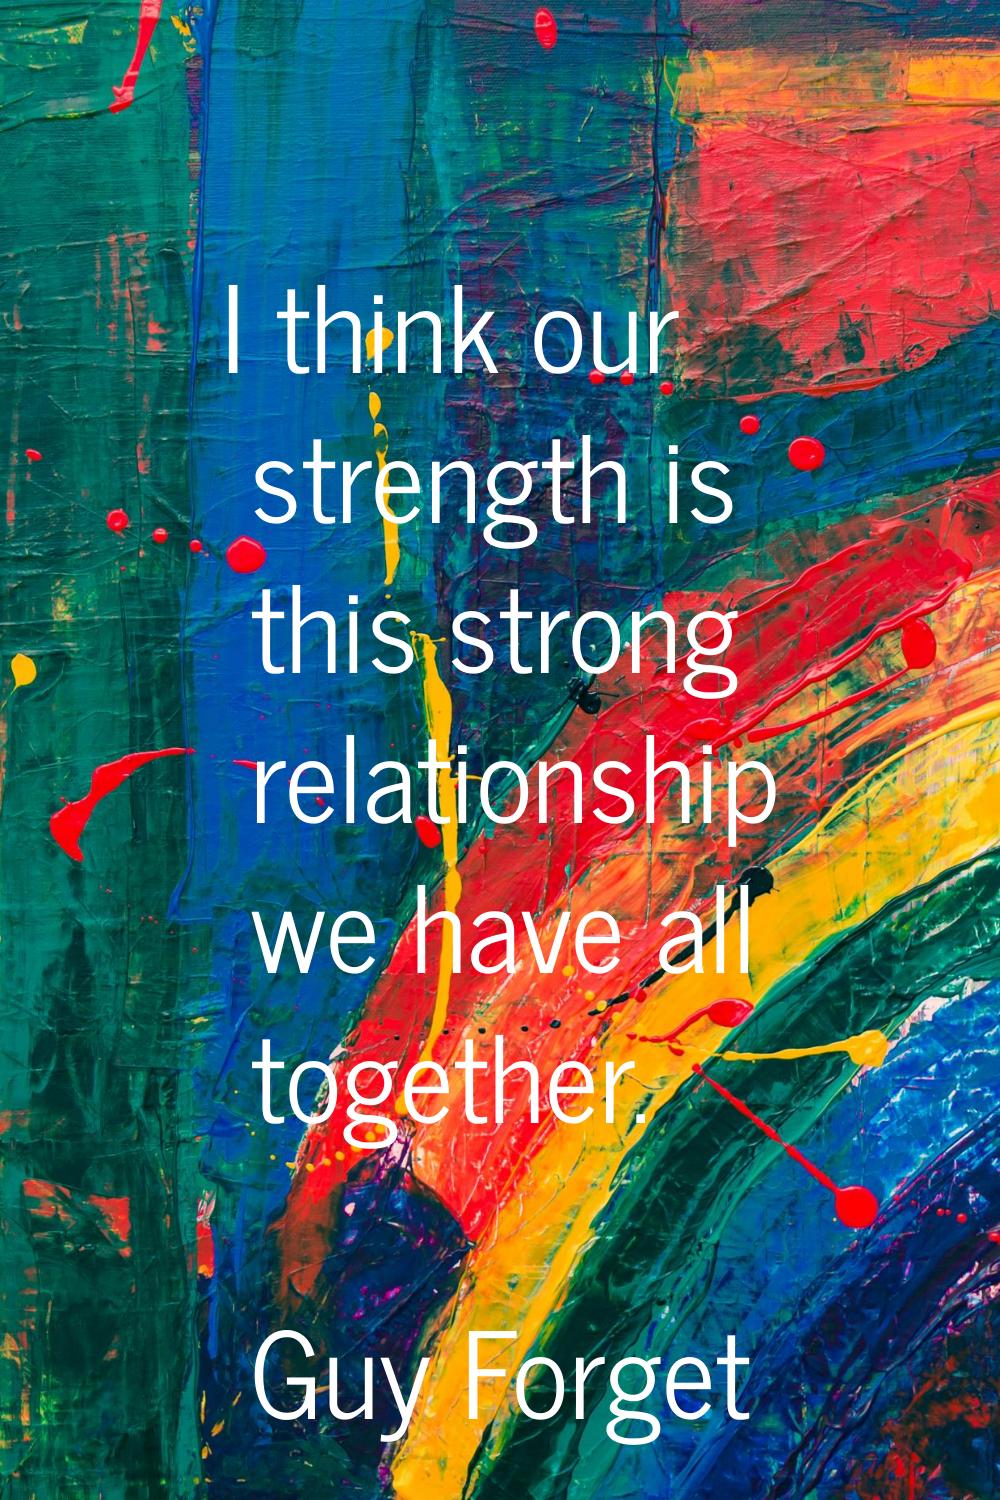 I think our strength is this strong relationship we have all together.